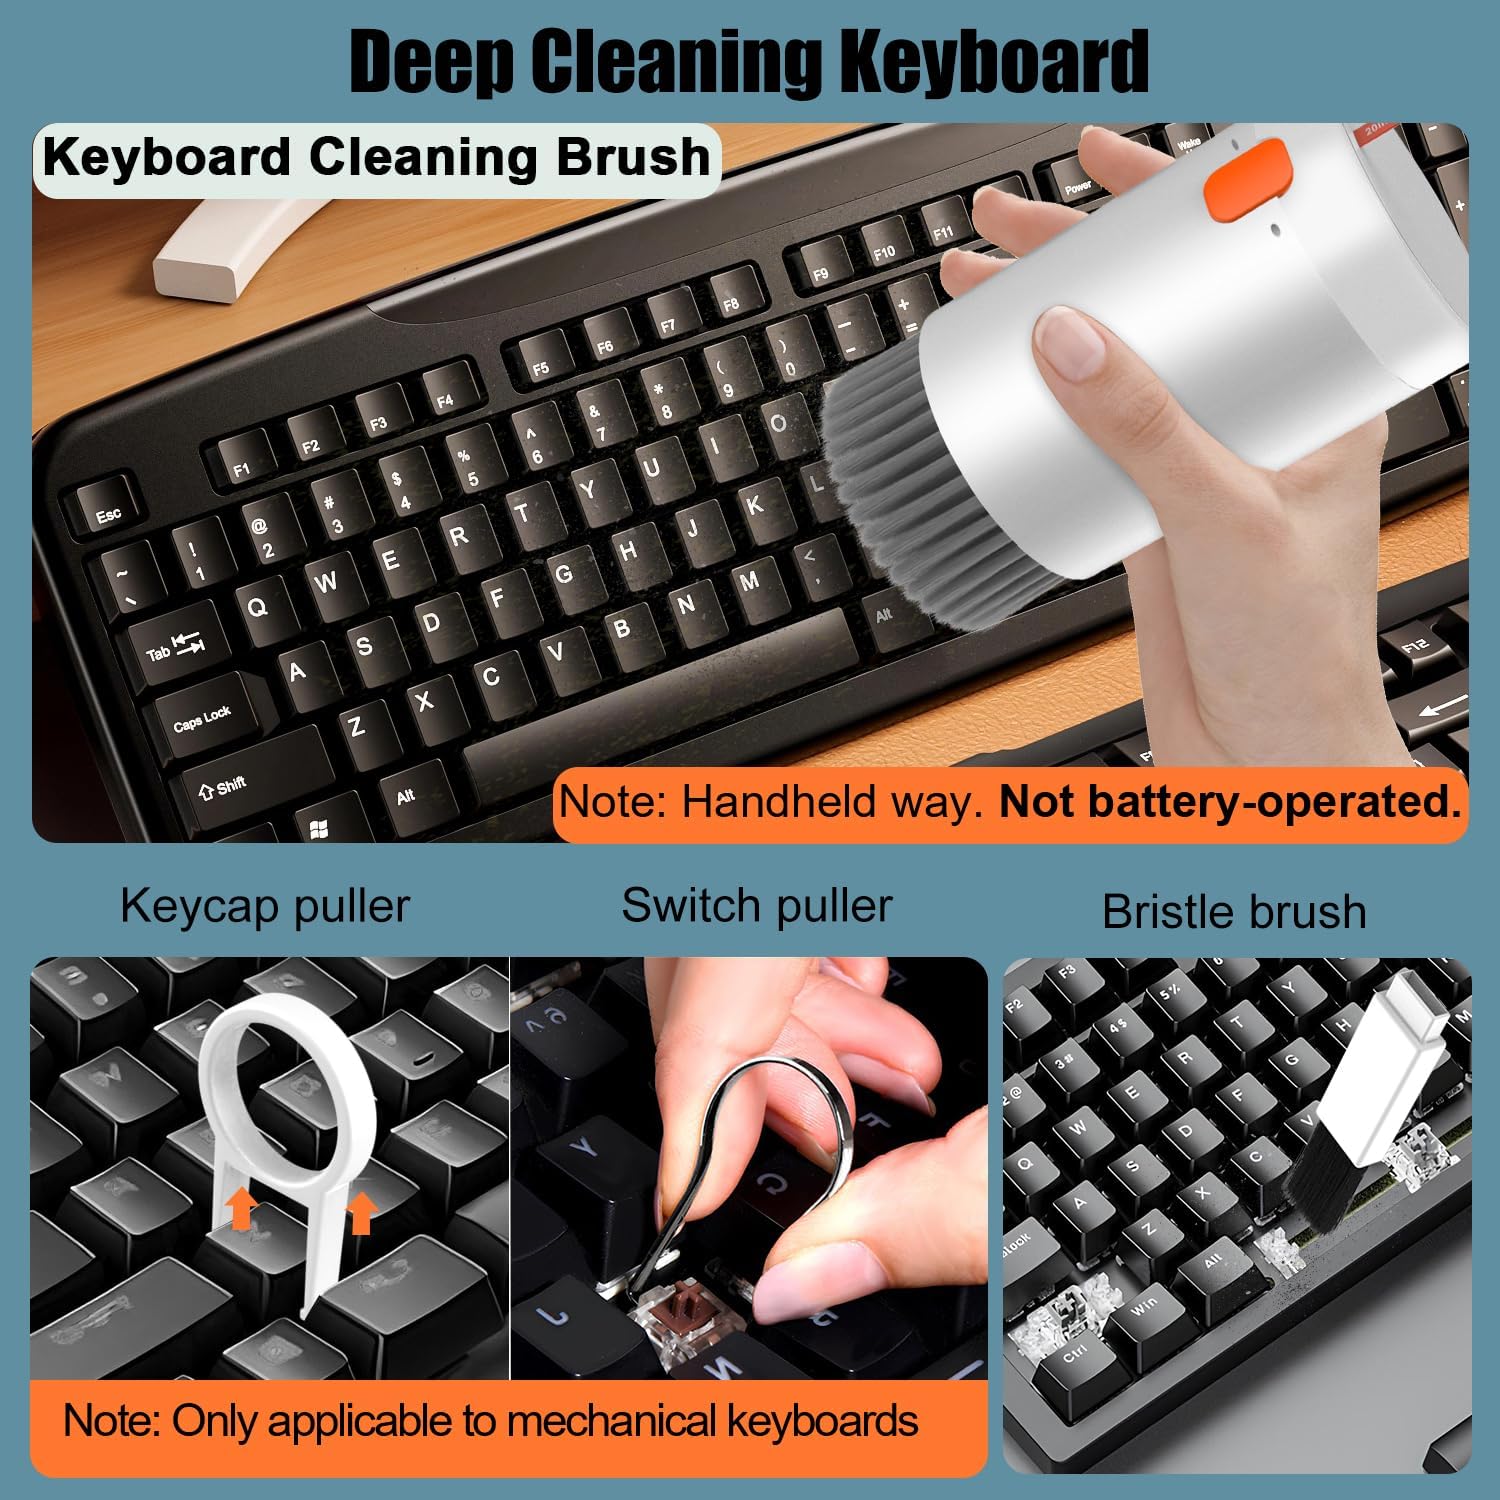 Multifunctional Cleaning Brush 20-in-1 Keyboard Cleaning Kit - White